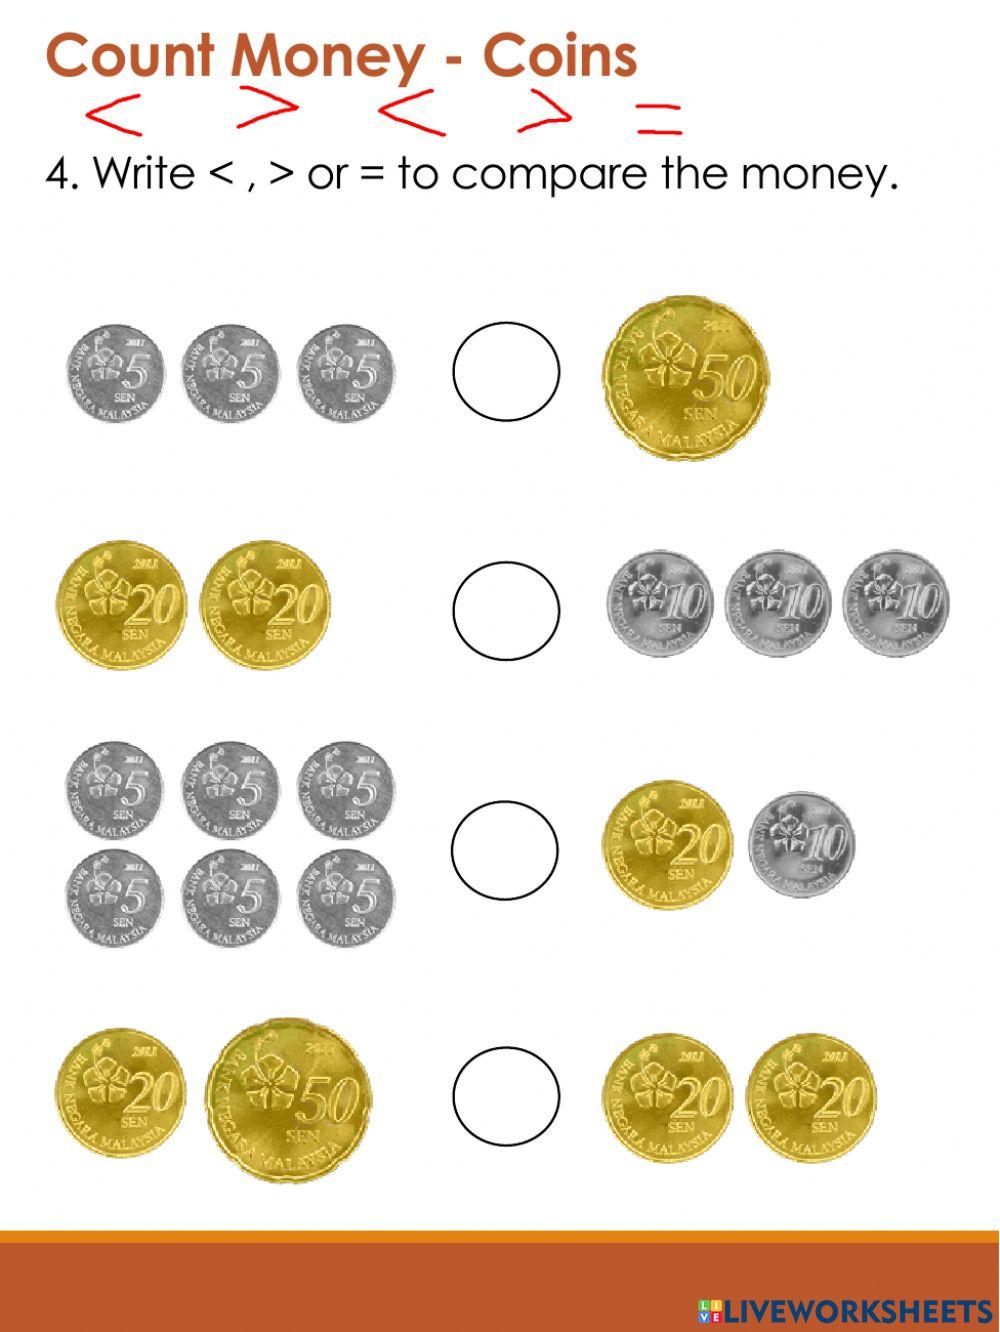 Counting Coins (Malaysian Money)